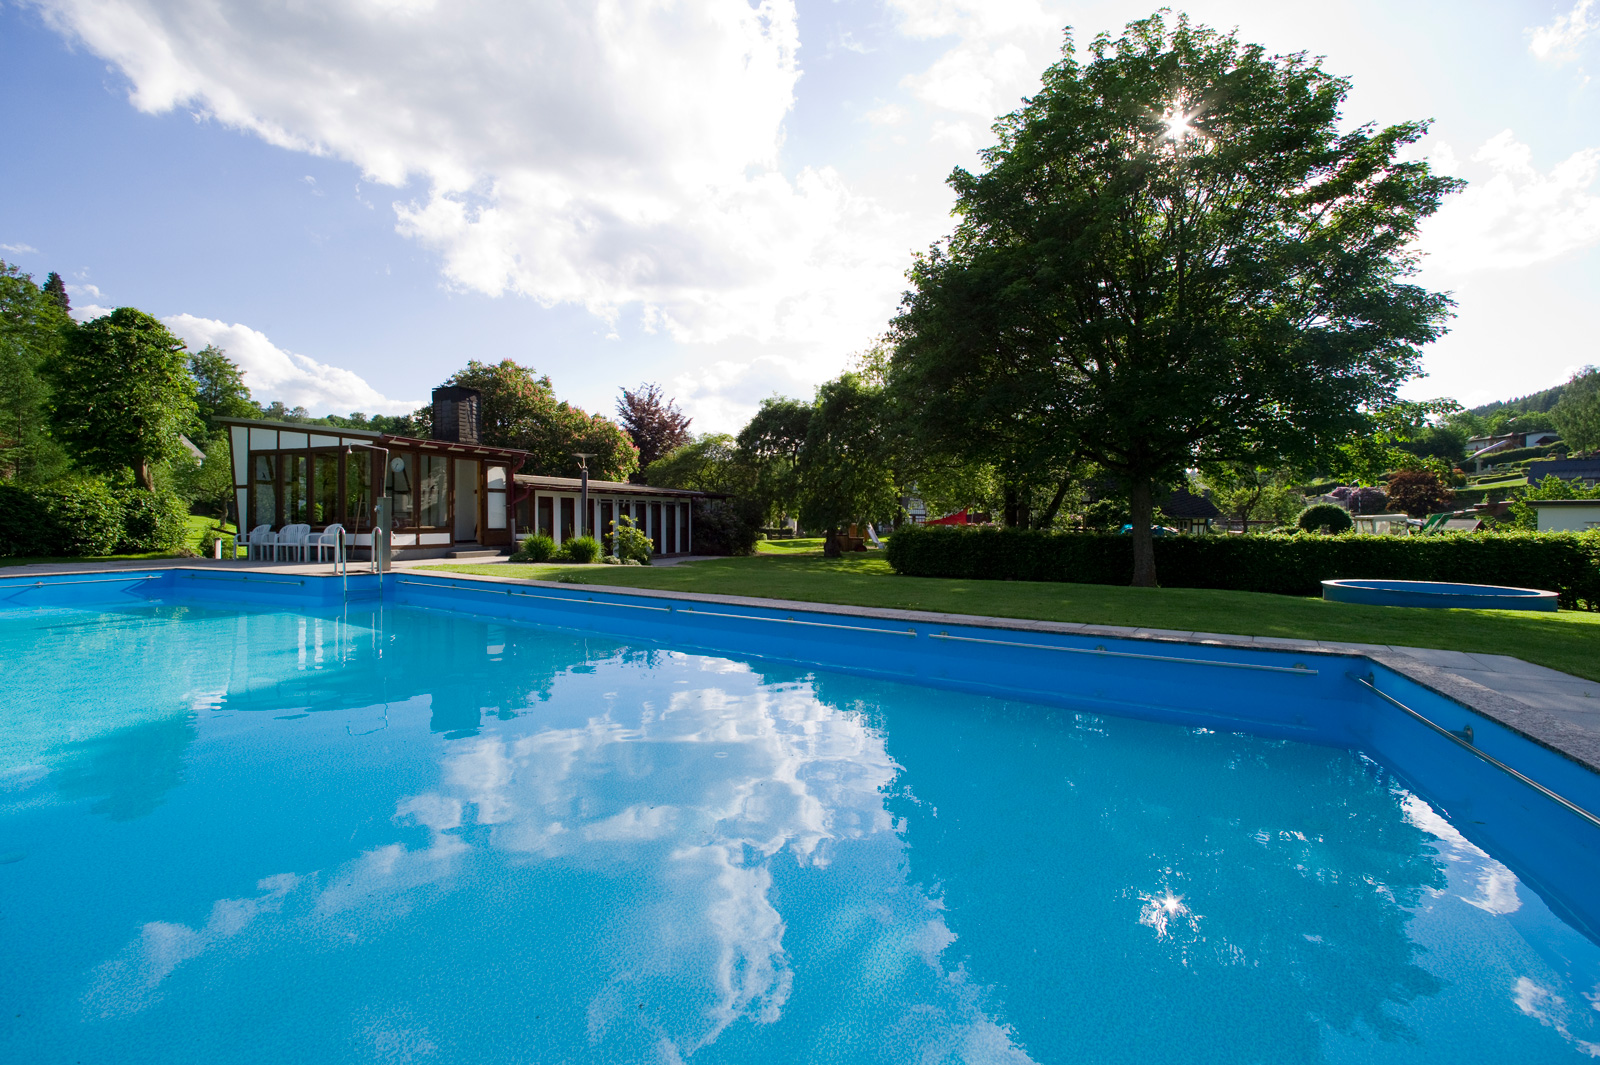 Outdoor pool in the large garden